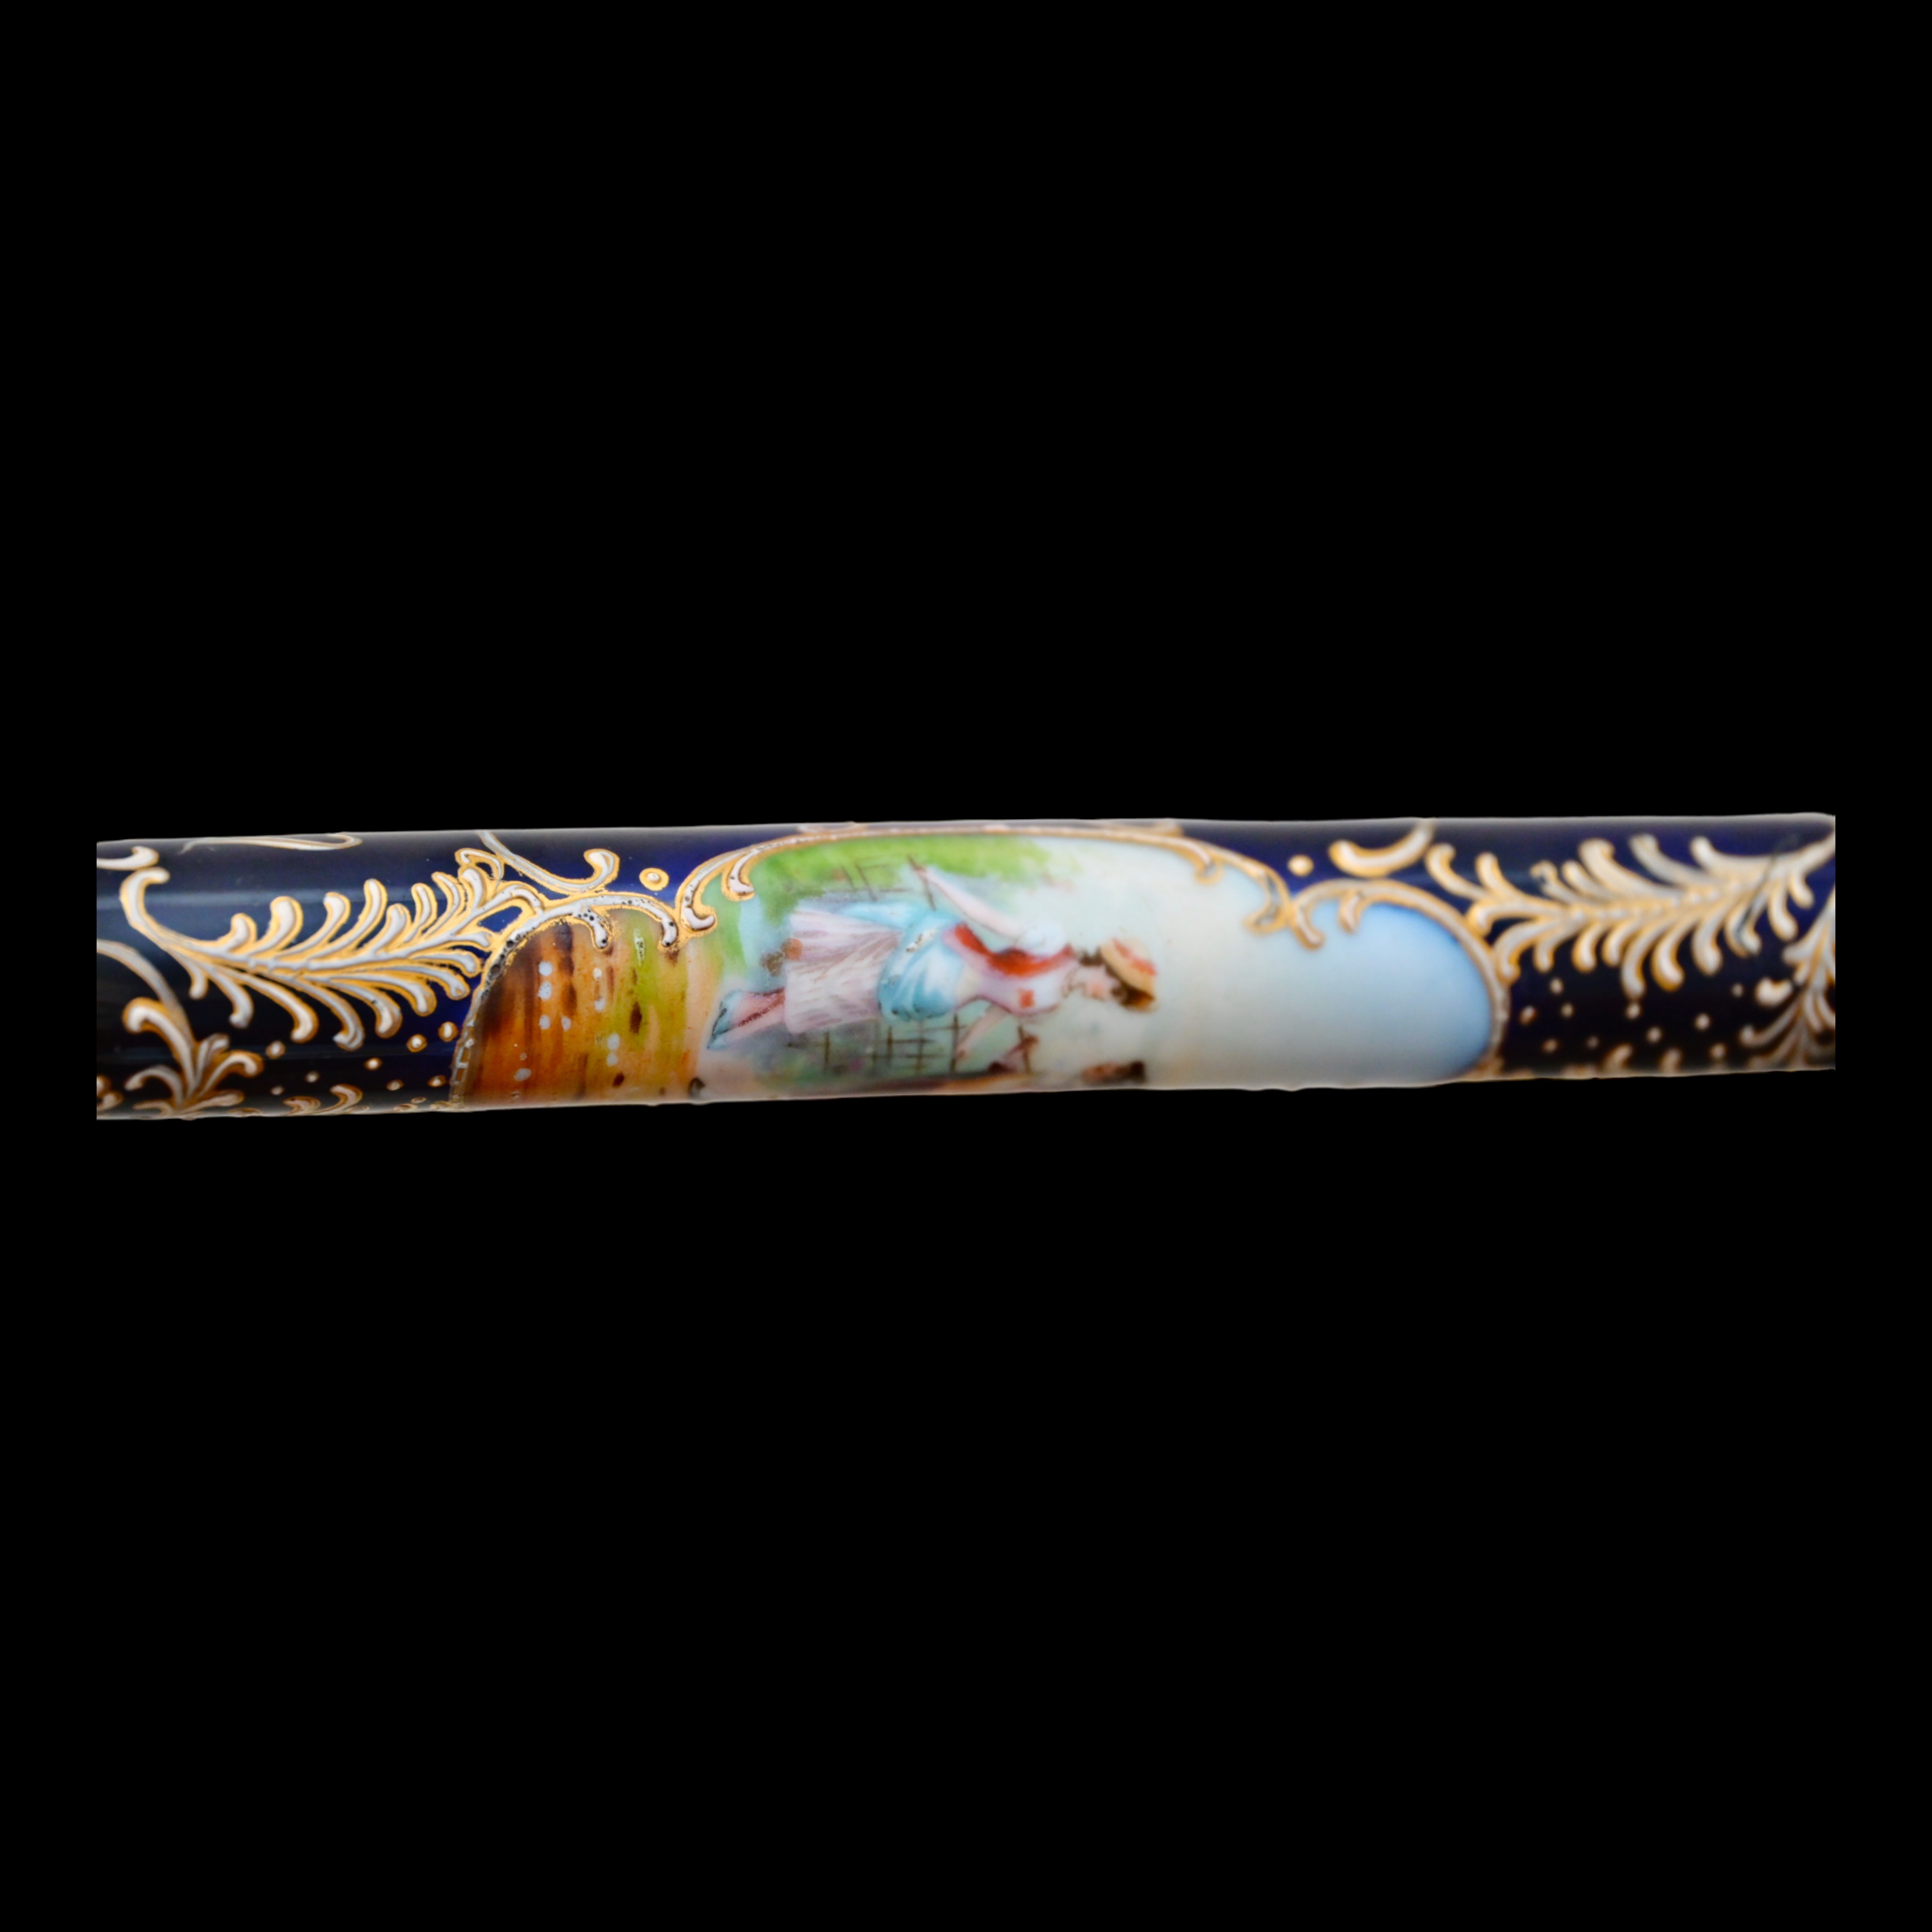 Rare Cane with Porcelain part. Limoge Porcelain Manufactory. France, 19th century. - Image 12 of 12